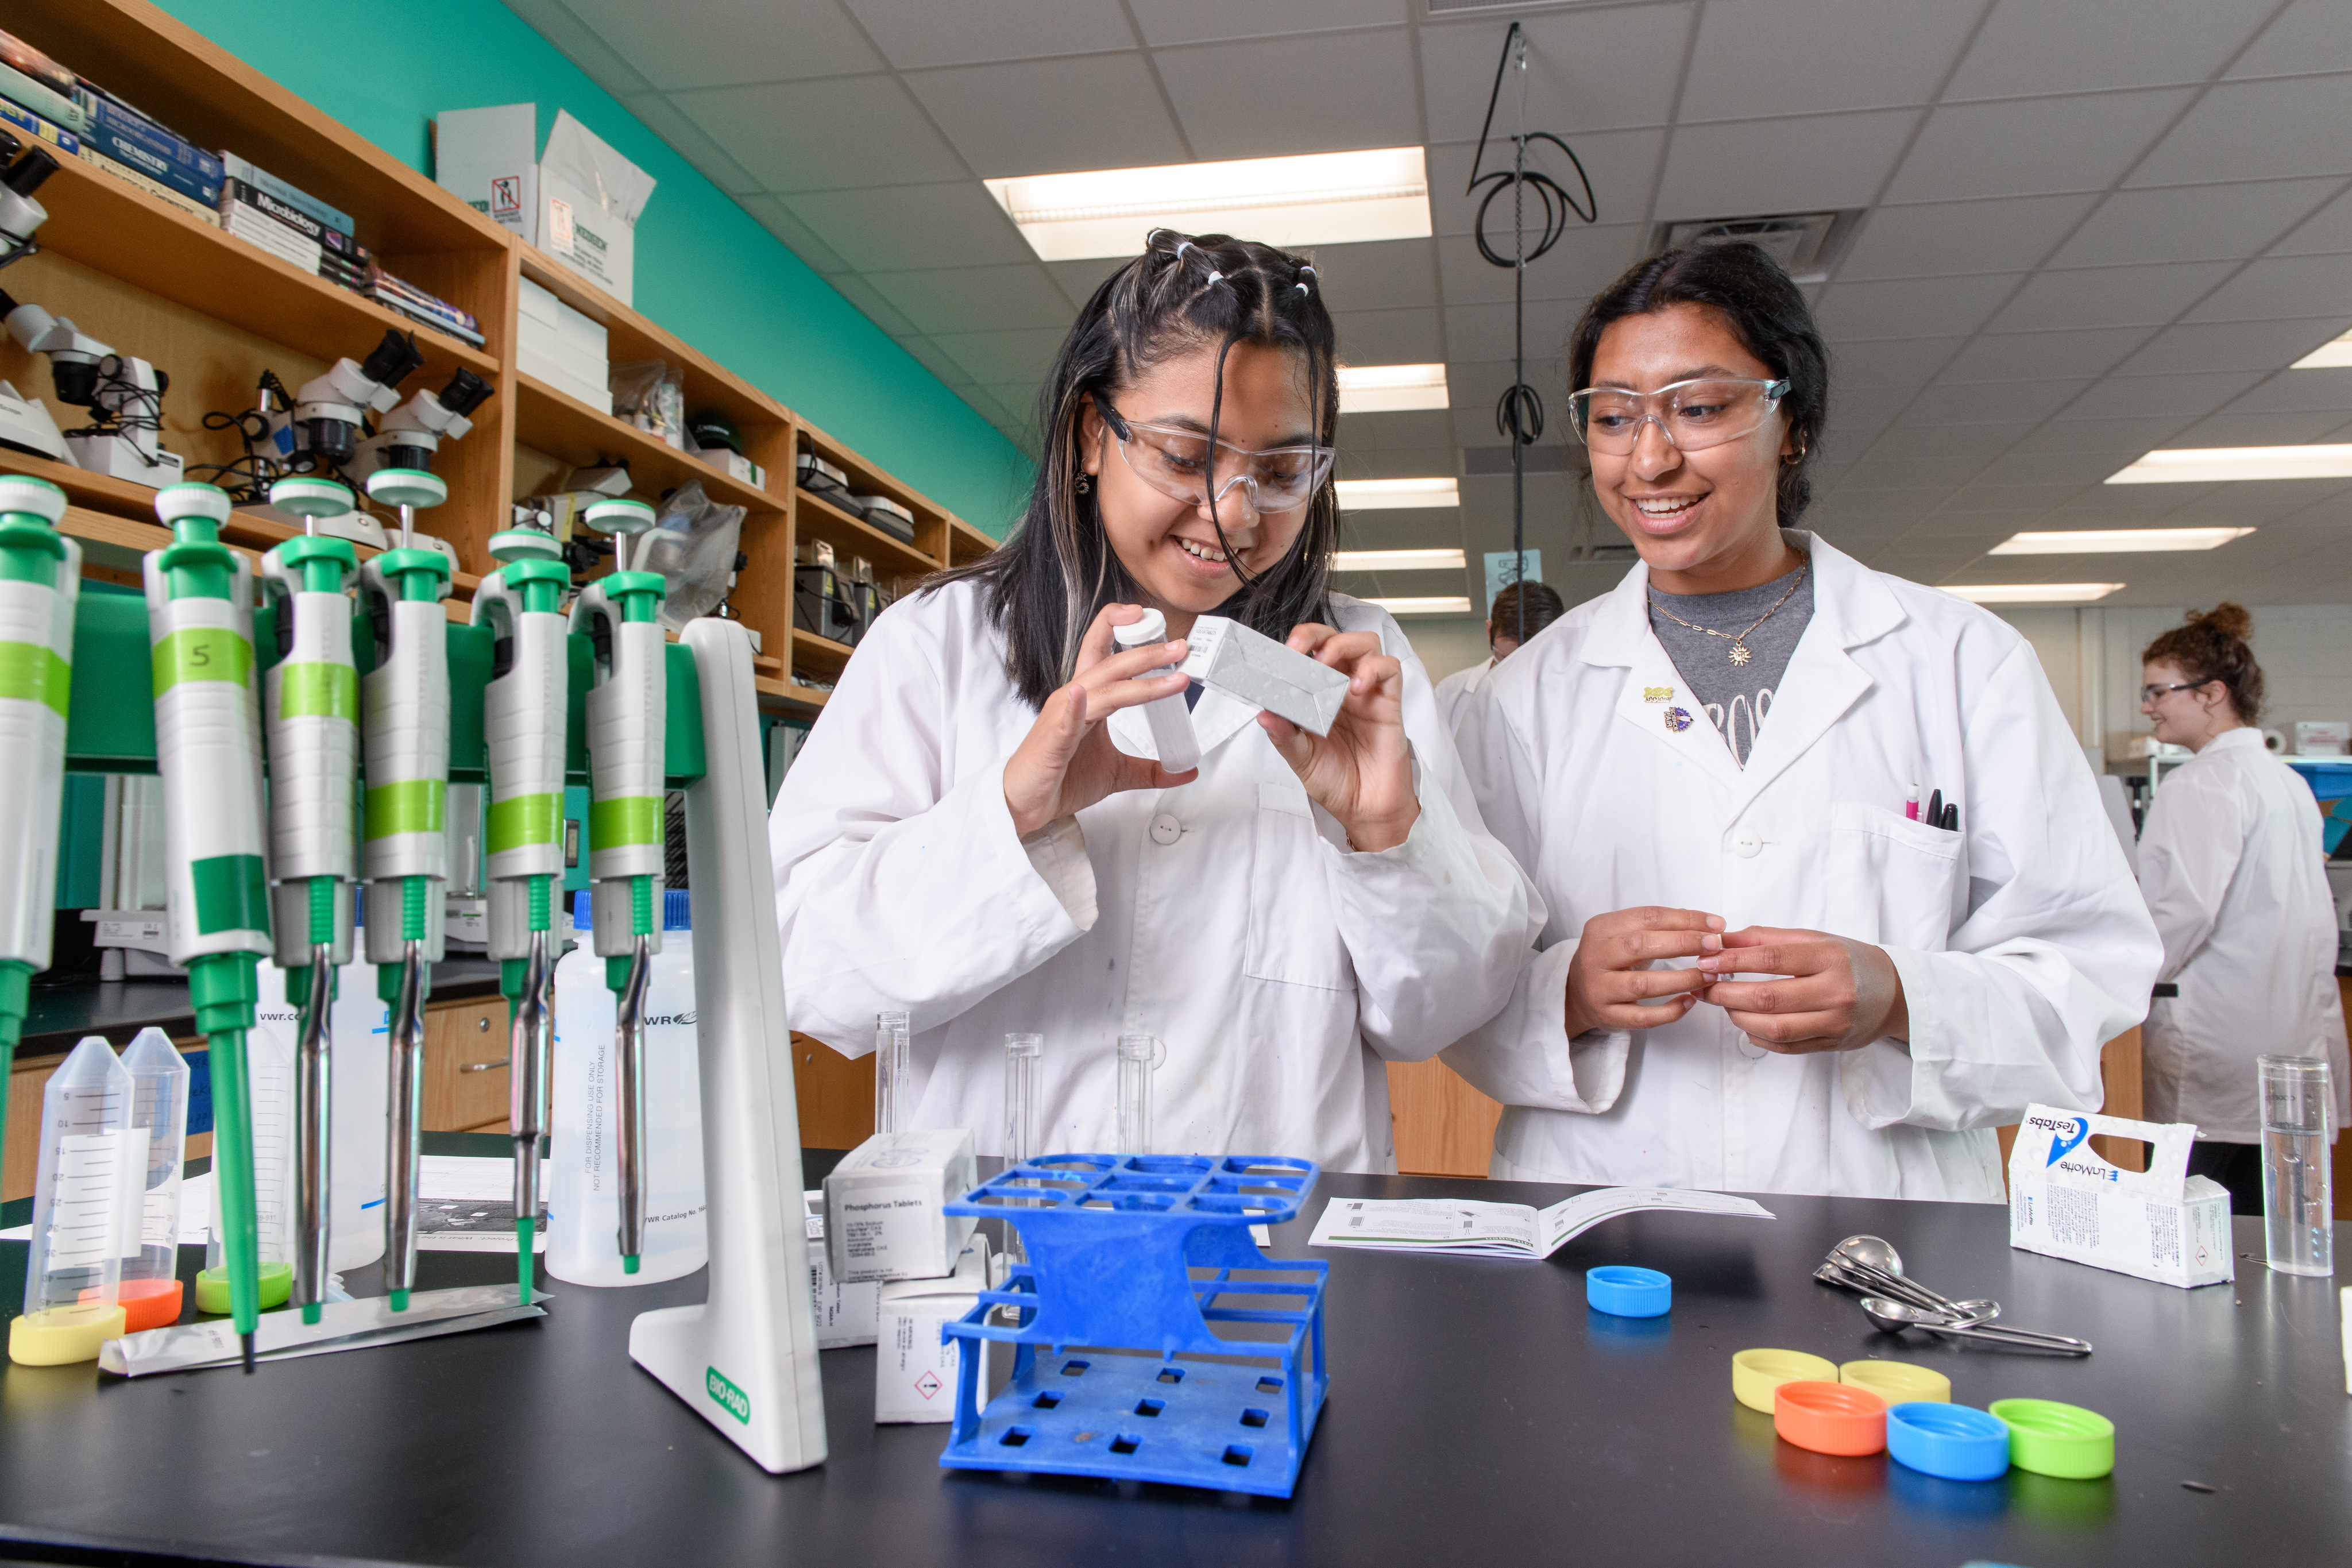 Two BioScience Careers students read the testing kit on a box in the lab.